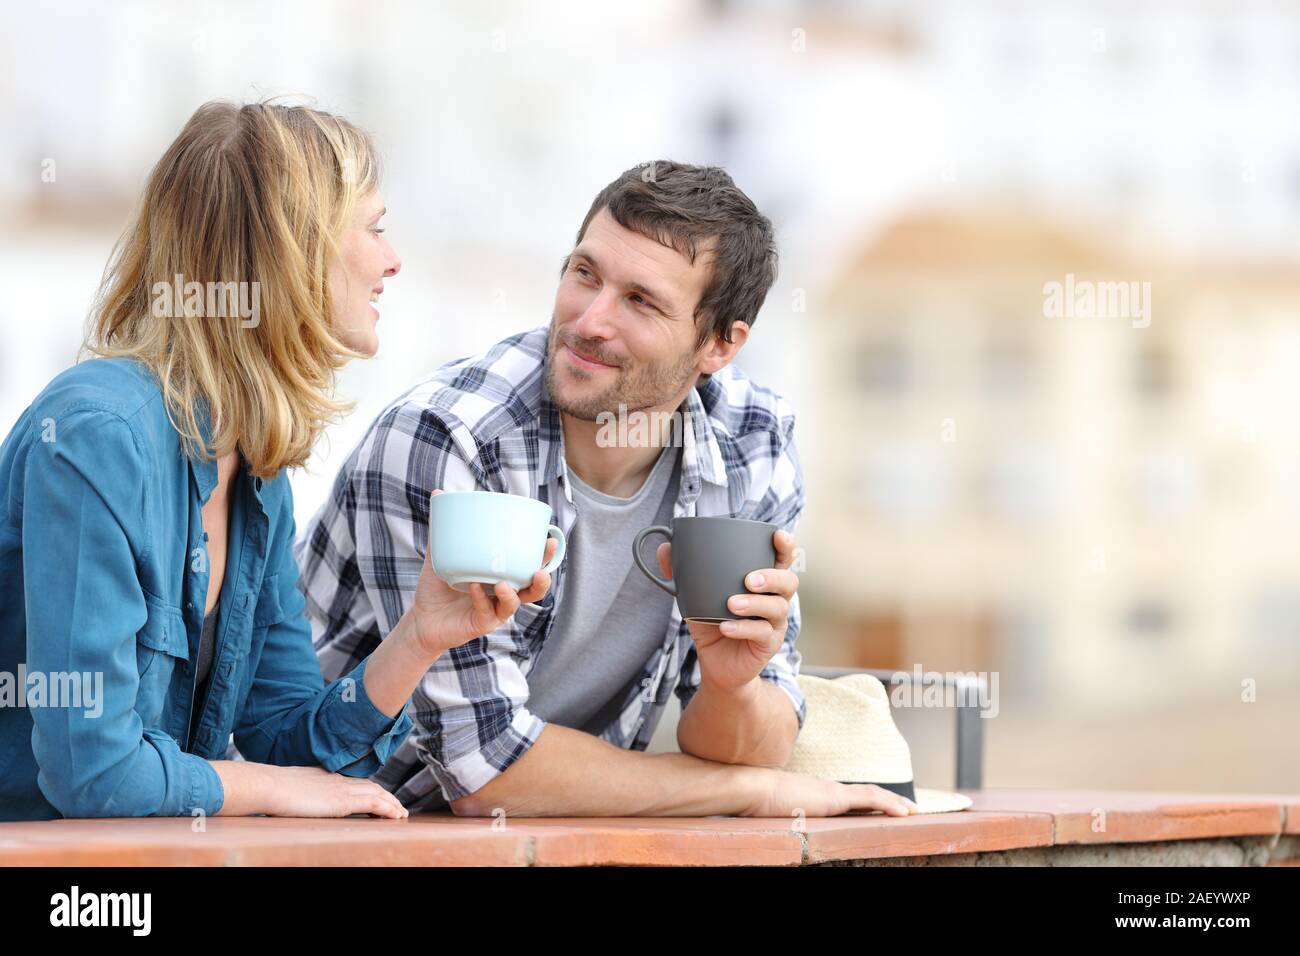 Relaxed couple talking holding coffee mugs standing in a balcony outdoors in a rural town Stock Photo